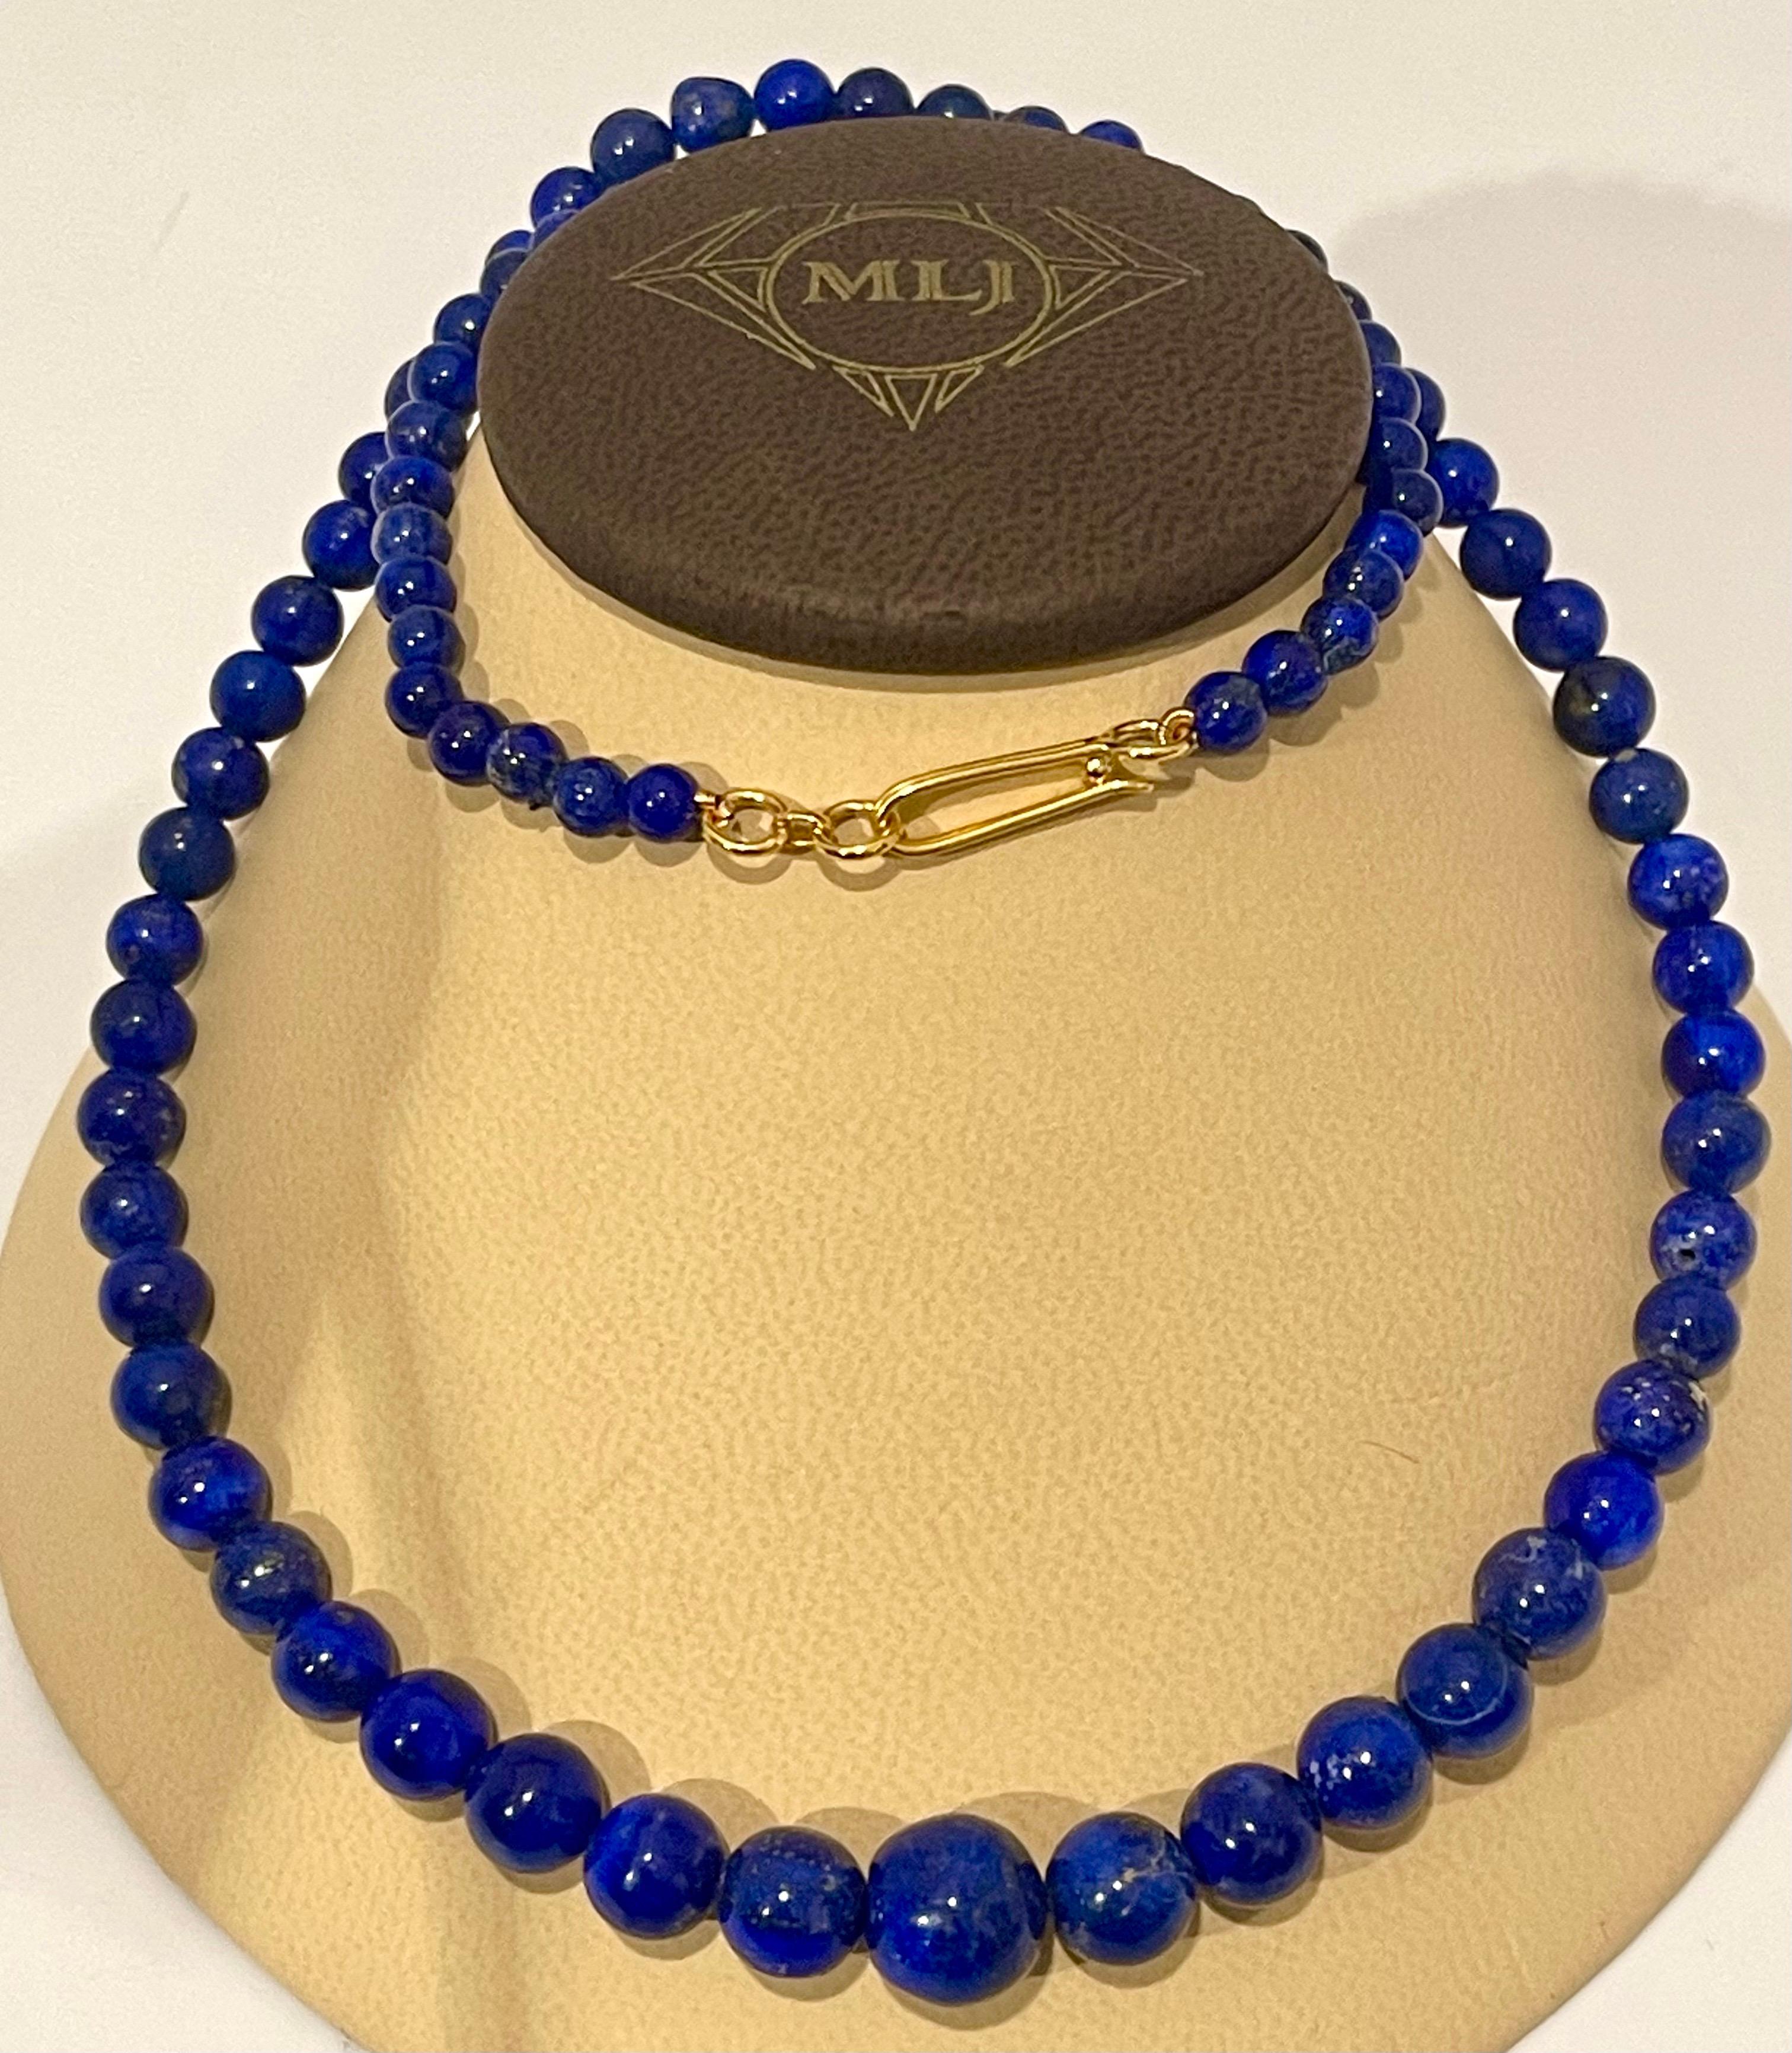 Vintage Lapis Lazuli Single Strand Necklace with 14 Karat Yellow Long Hook Clasp In Excellent Condition For Sale In New York, NY